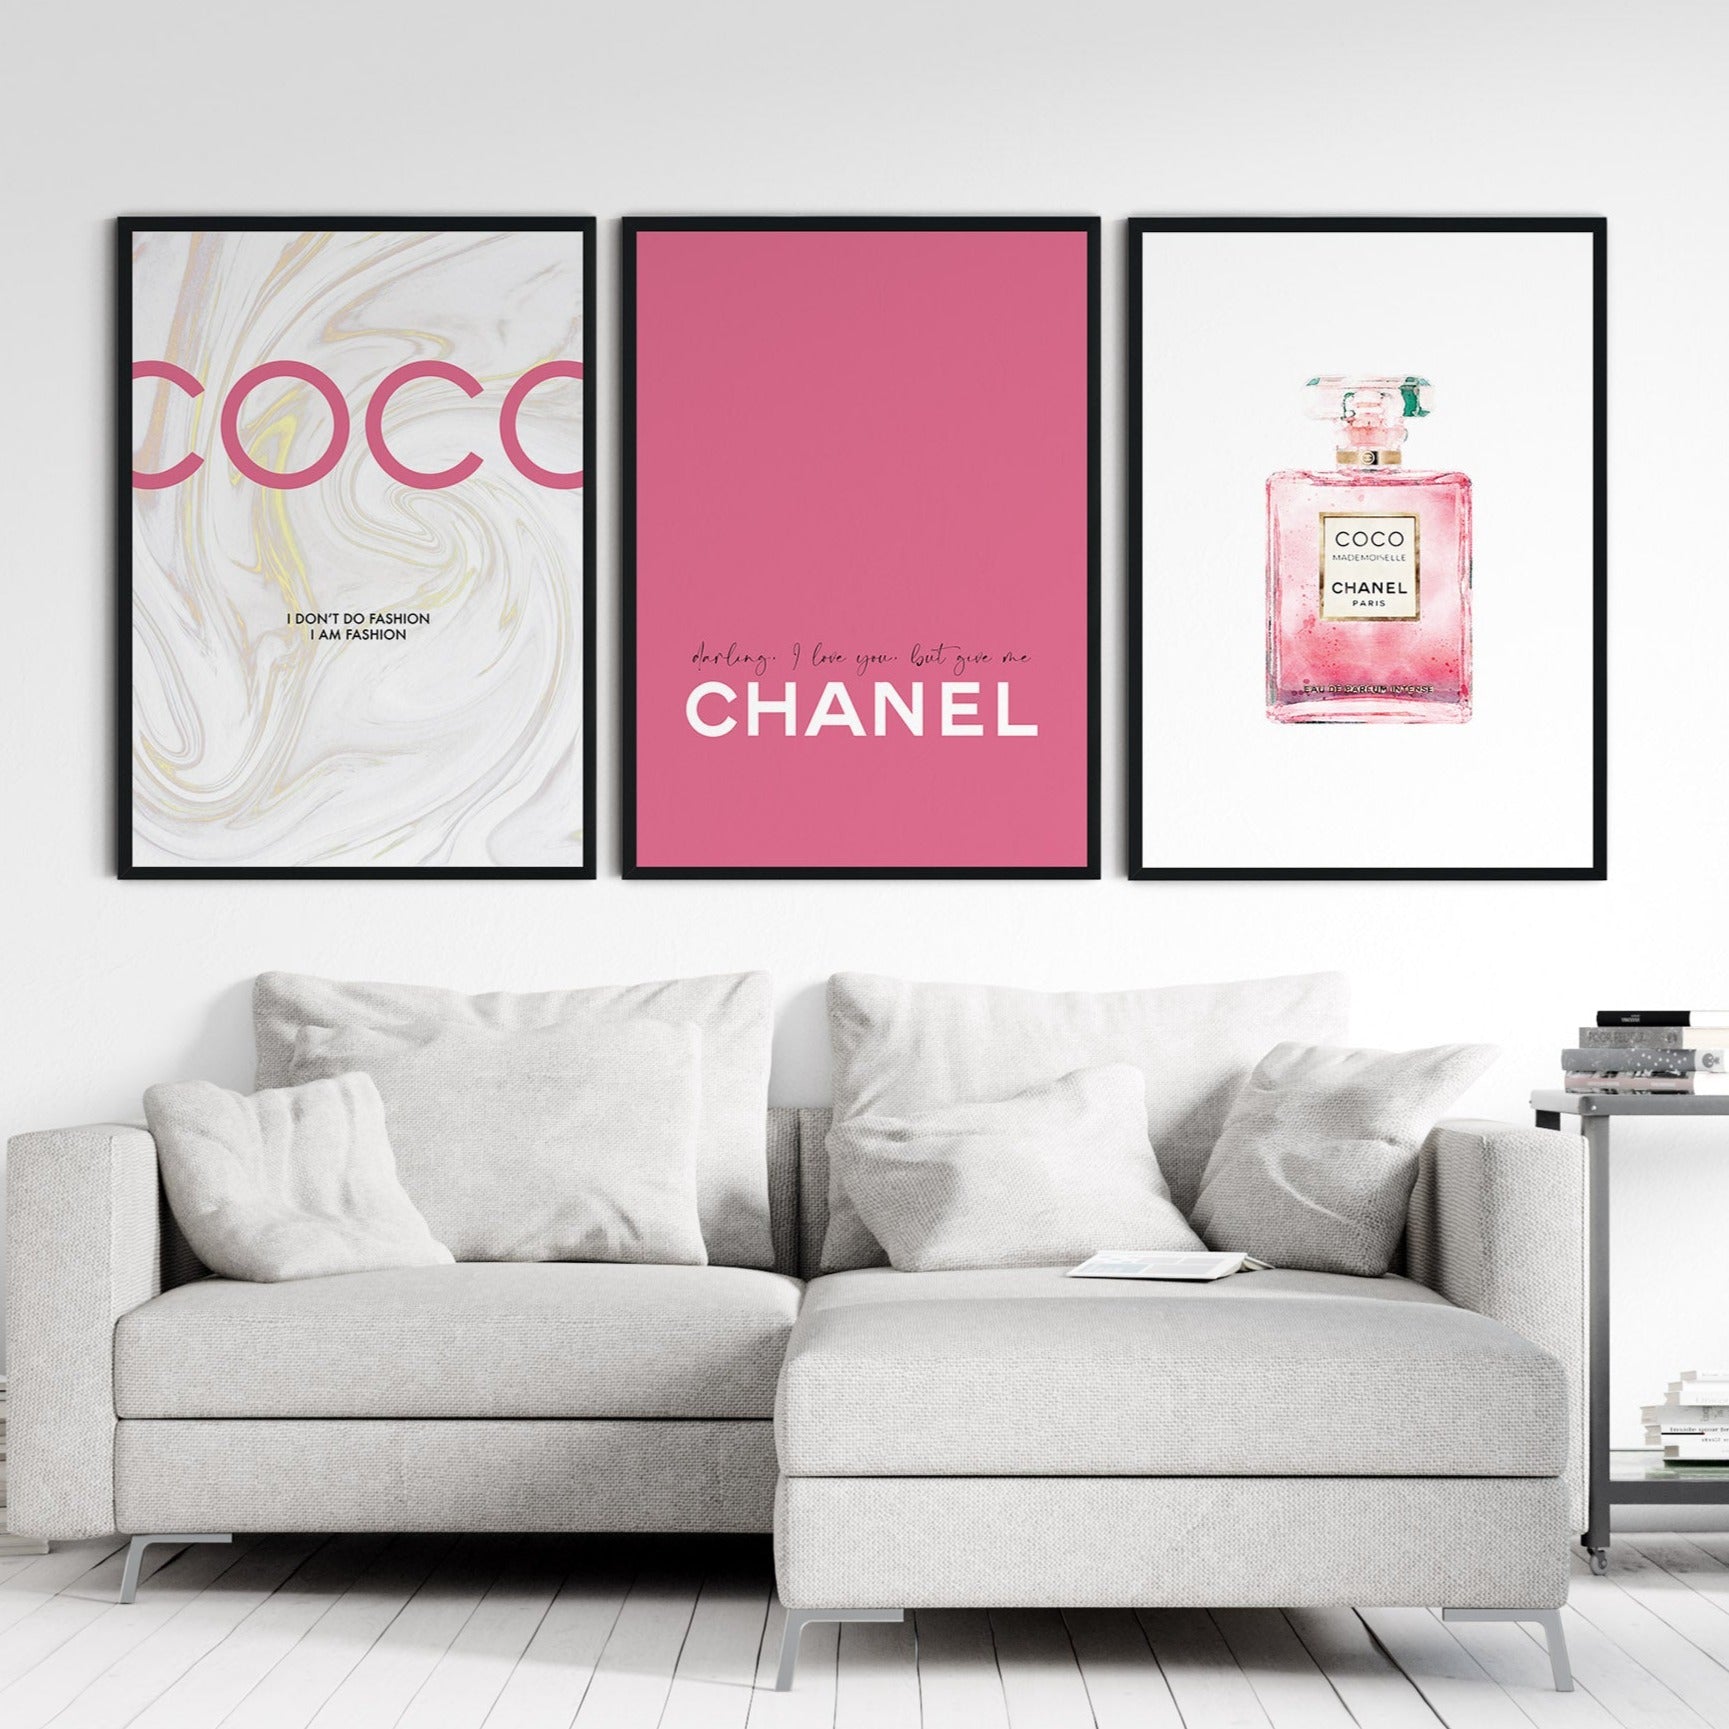 dior and chanel books decor set pink